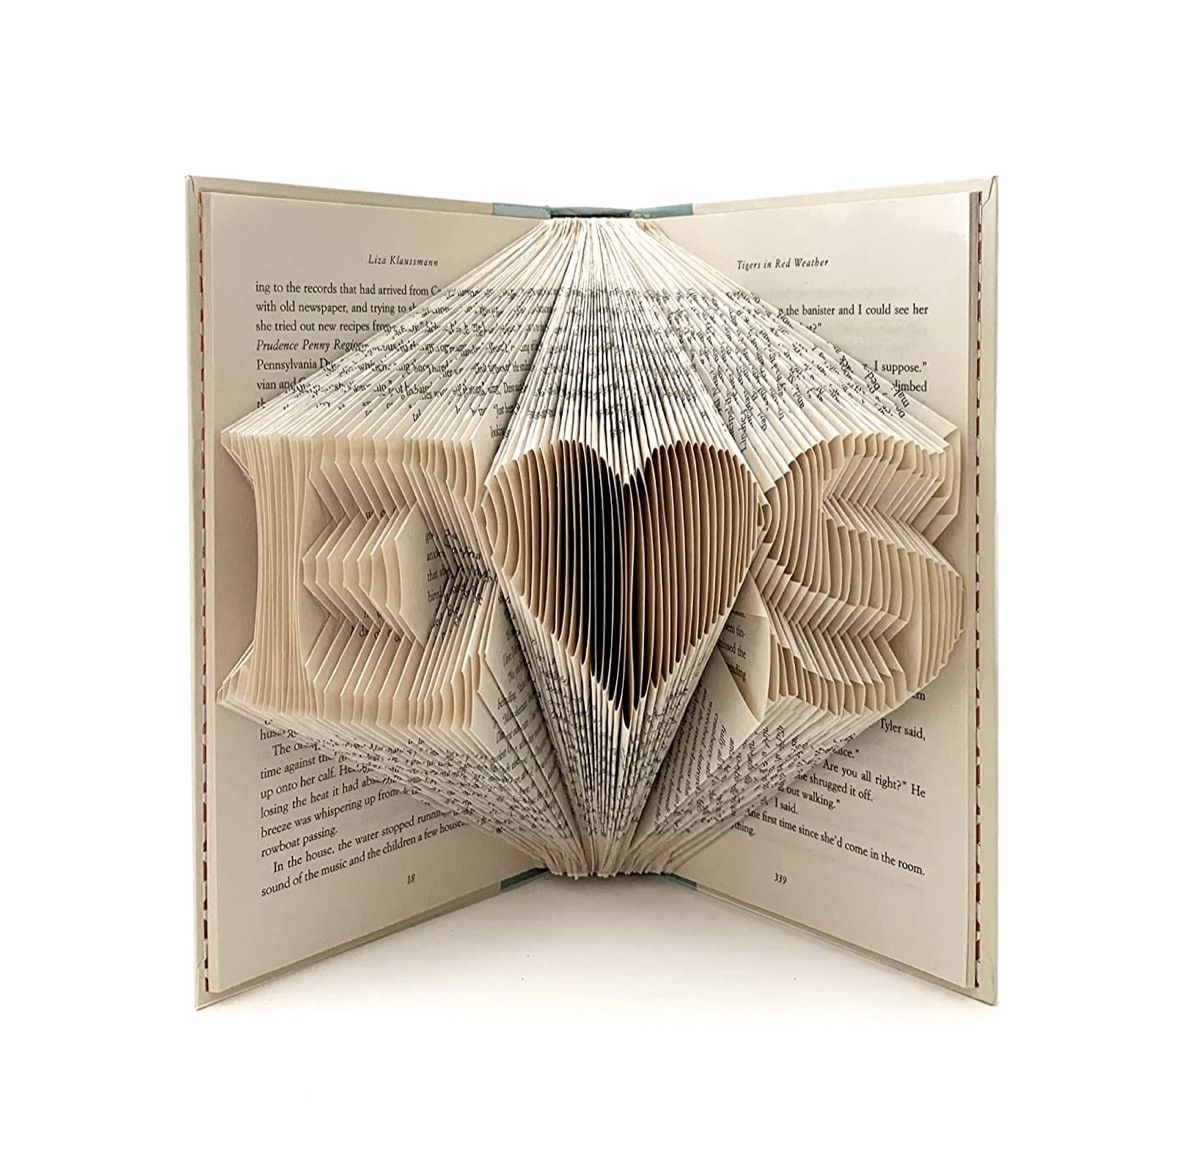 Folded book art for every ocassion